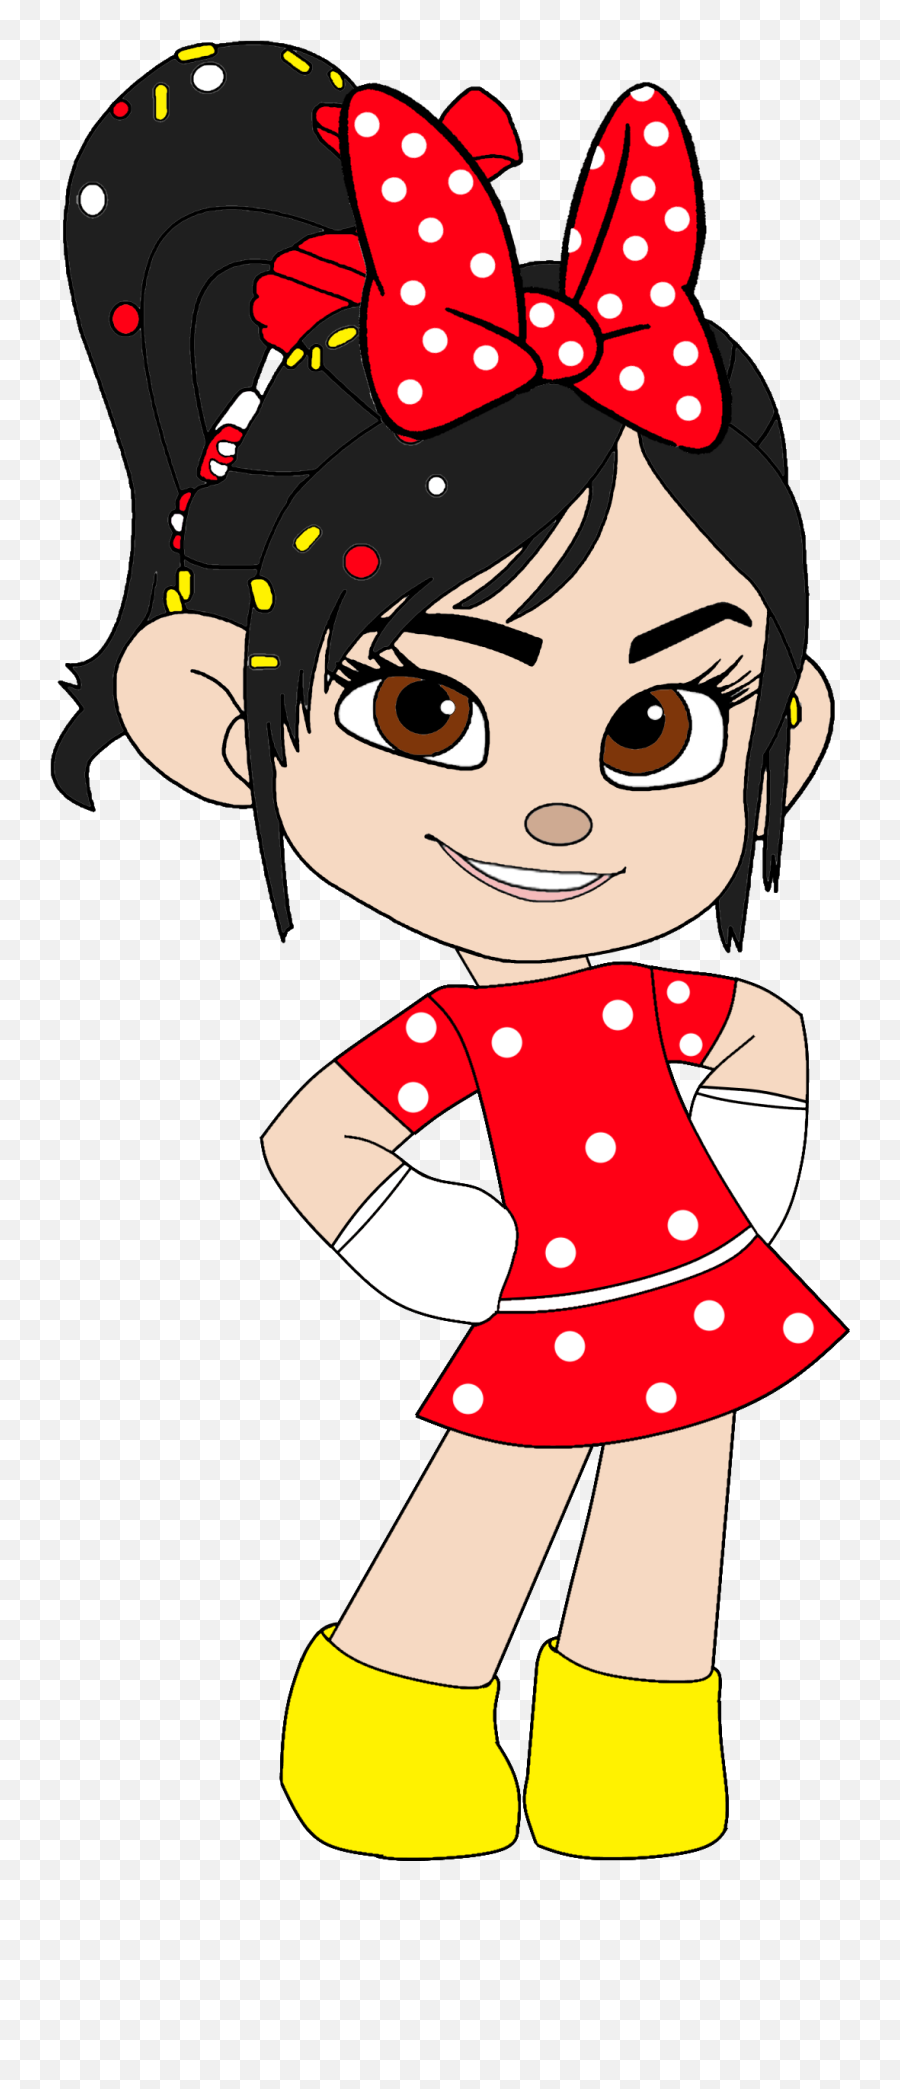 Vanellope As Minnie Mouse With A Bow - Ralph Emoji,Minnie Mouse Bow Clipart